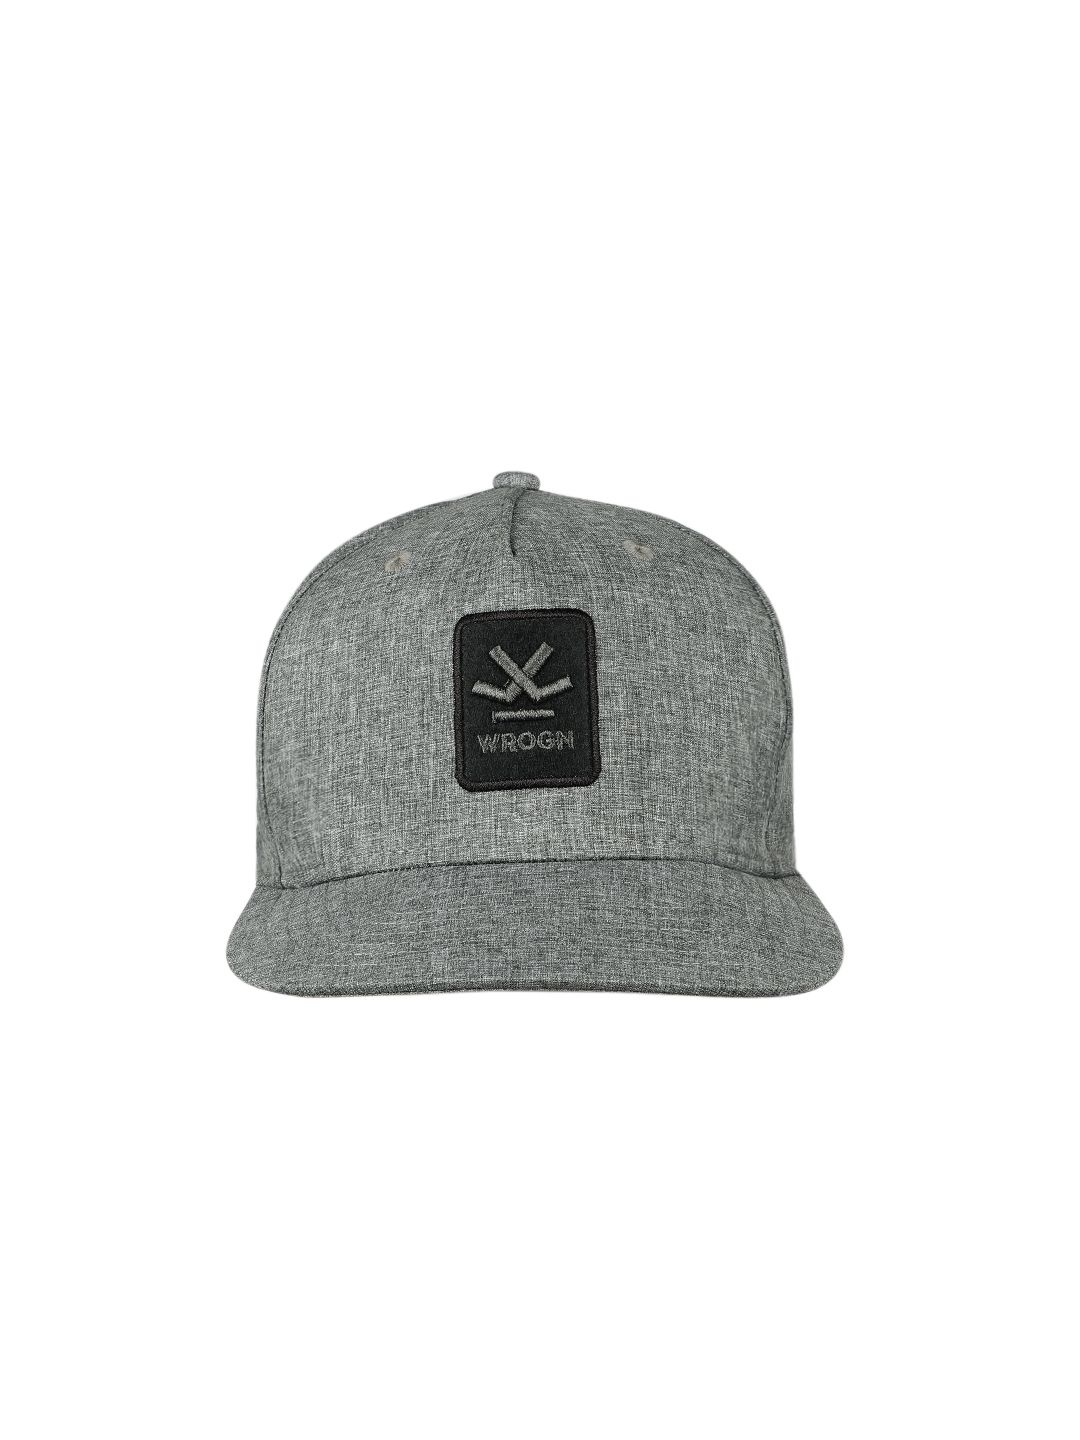 WROGN Unisex Grey Embroidered Snapback Cap Price in India